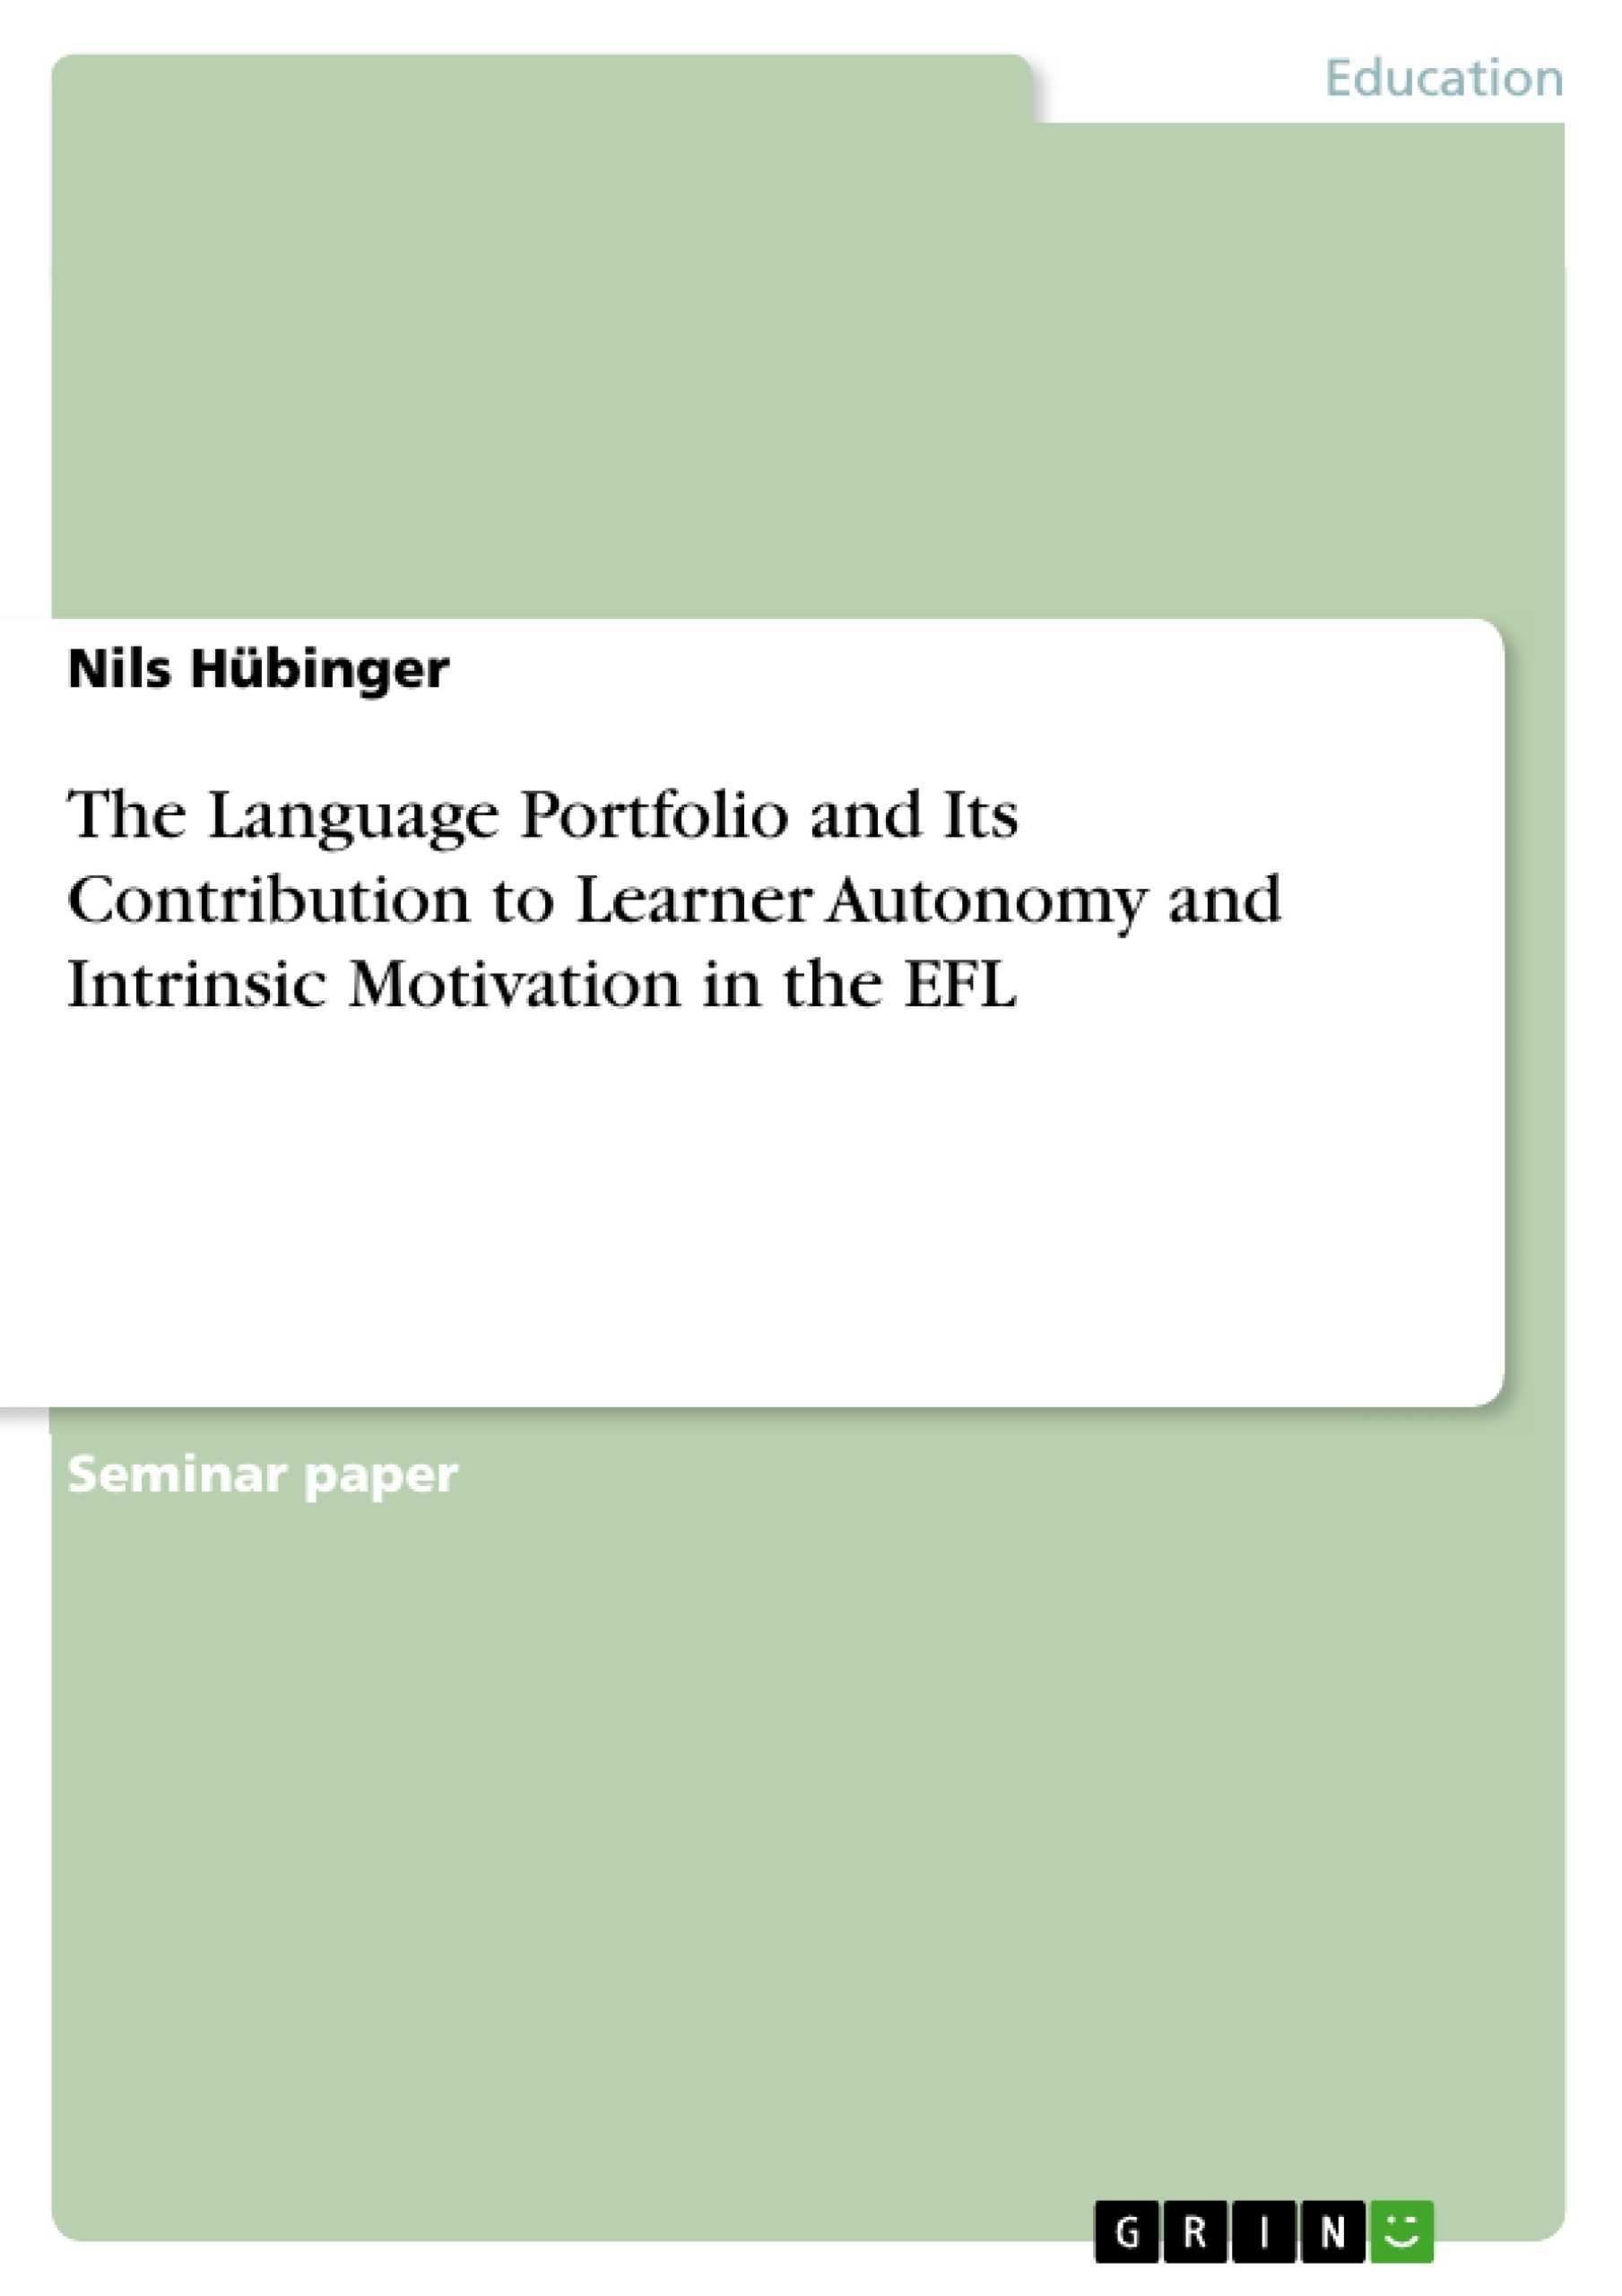 Title: The Language Portfolio and Its Contribution to Learner Autonomy and Intrinsic Motivation in the EFL